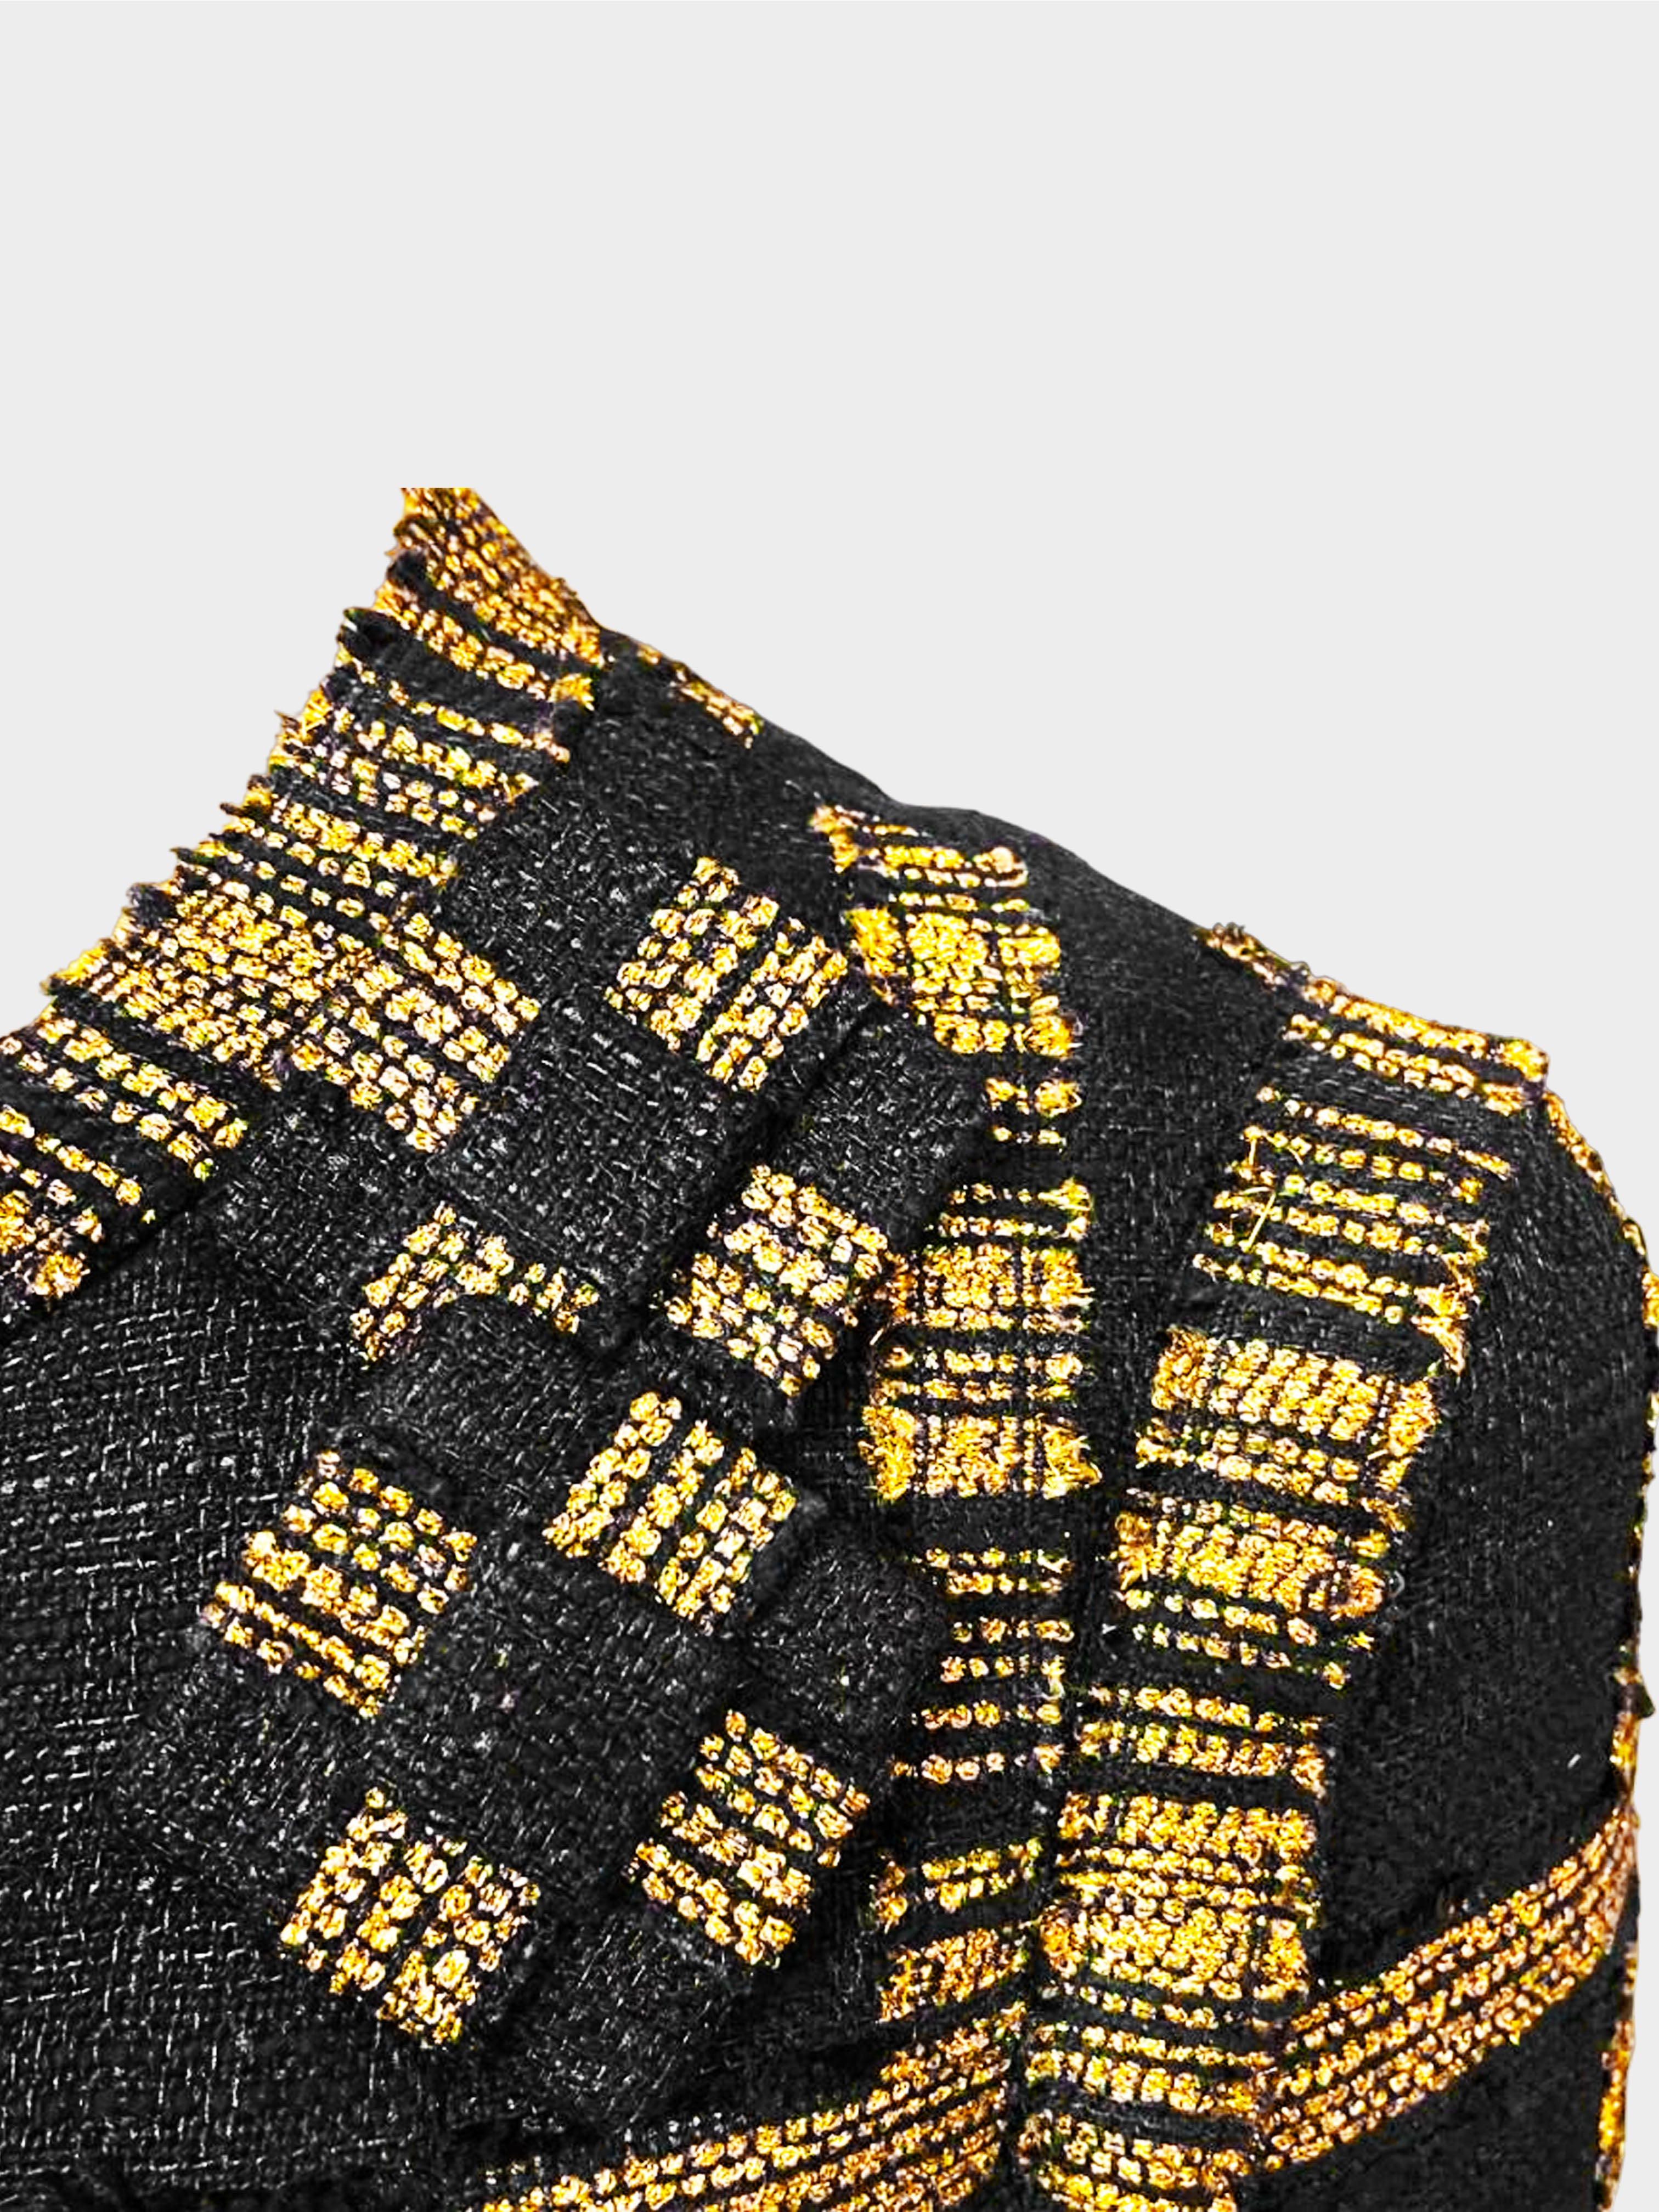 Chanel Fall 2006 Black and Gold Tweed Suit